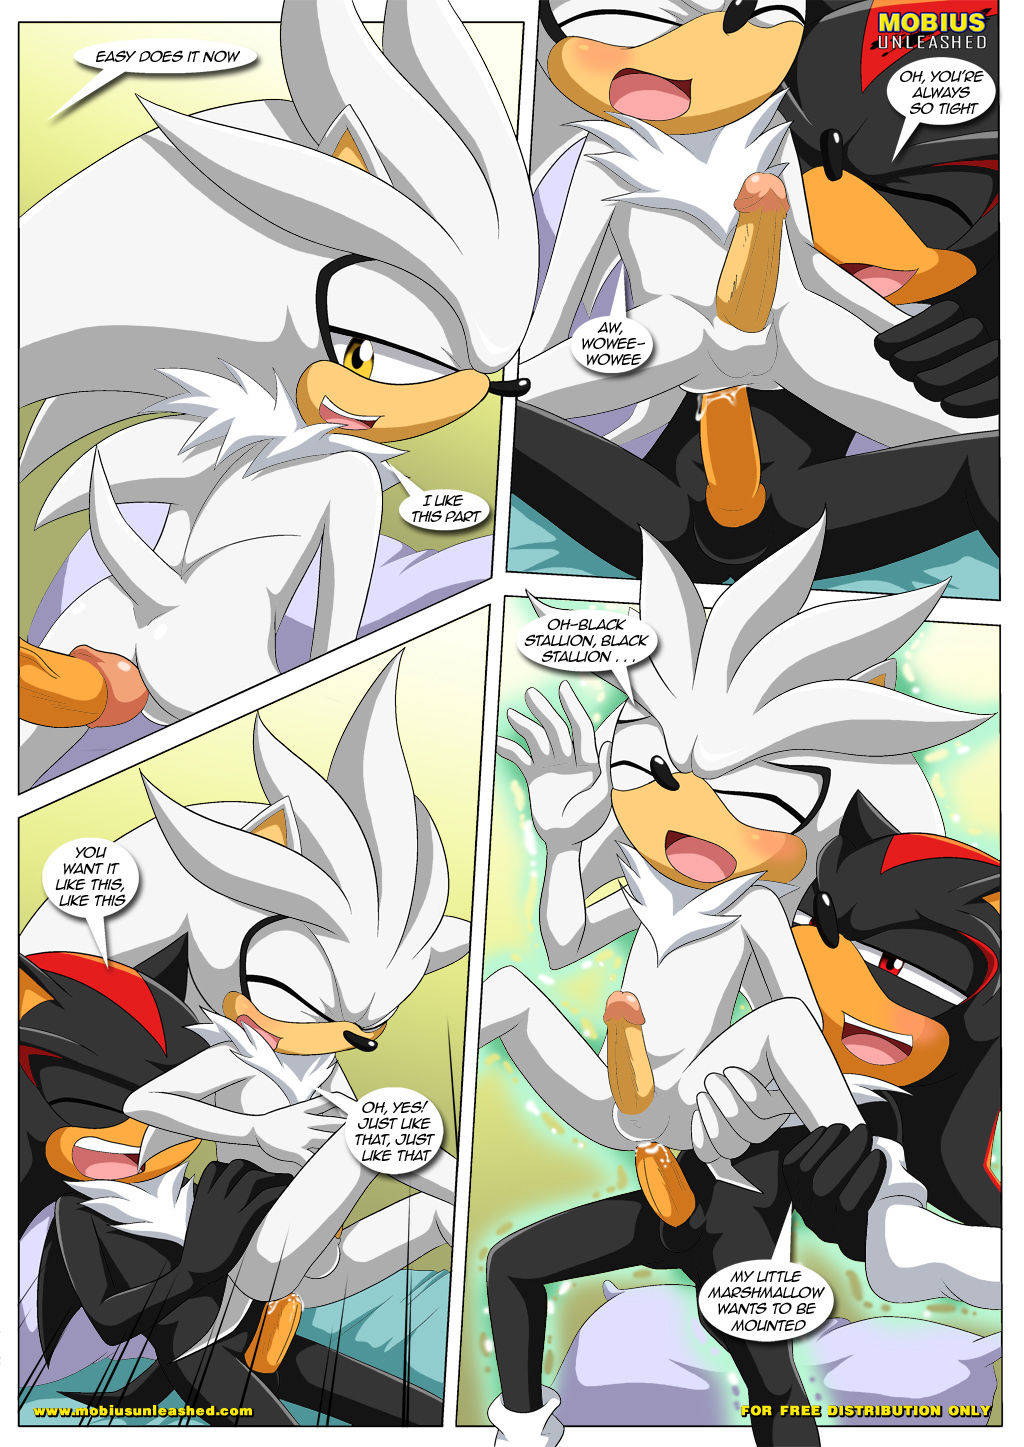 Frisky Levy Hogs (Sonic The Hedgehog) by Palcomix page 5